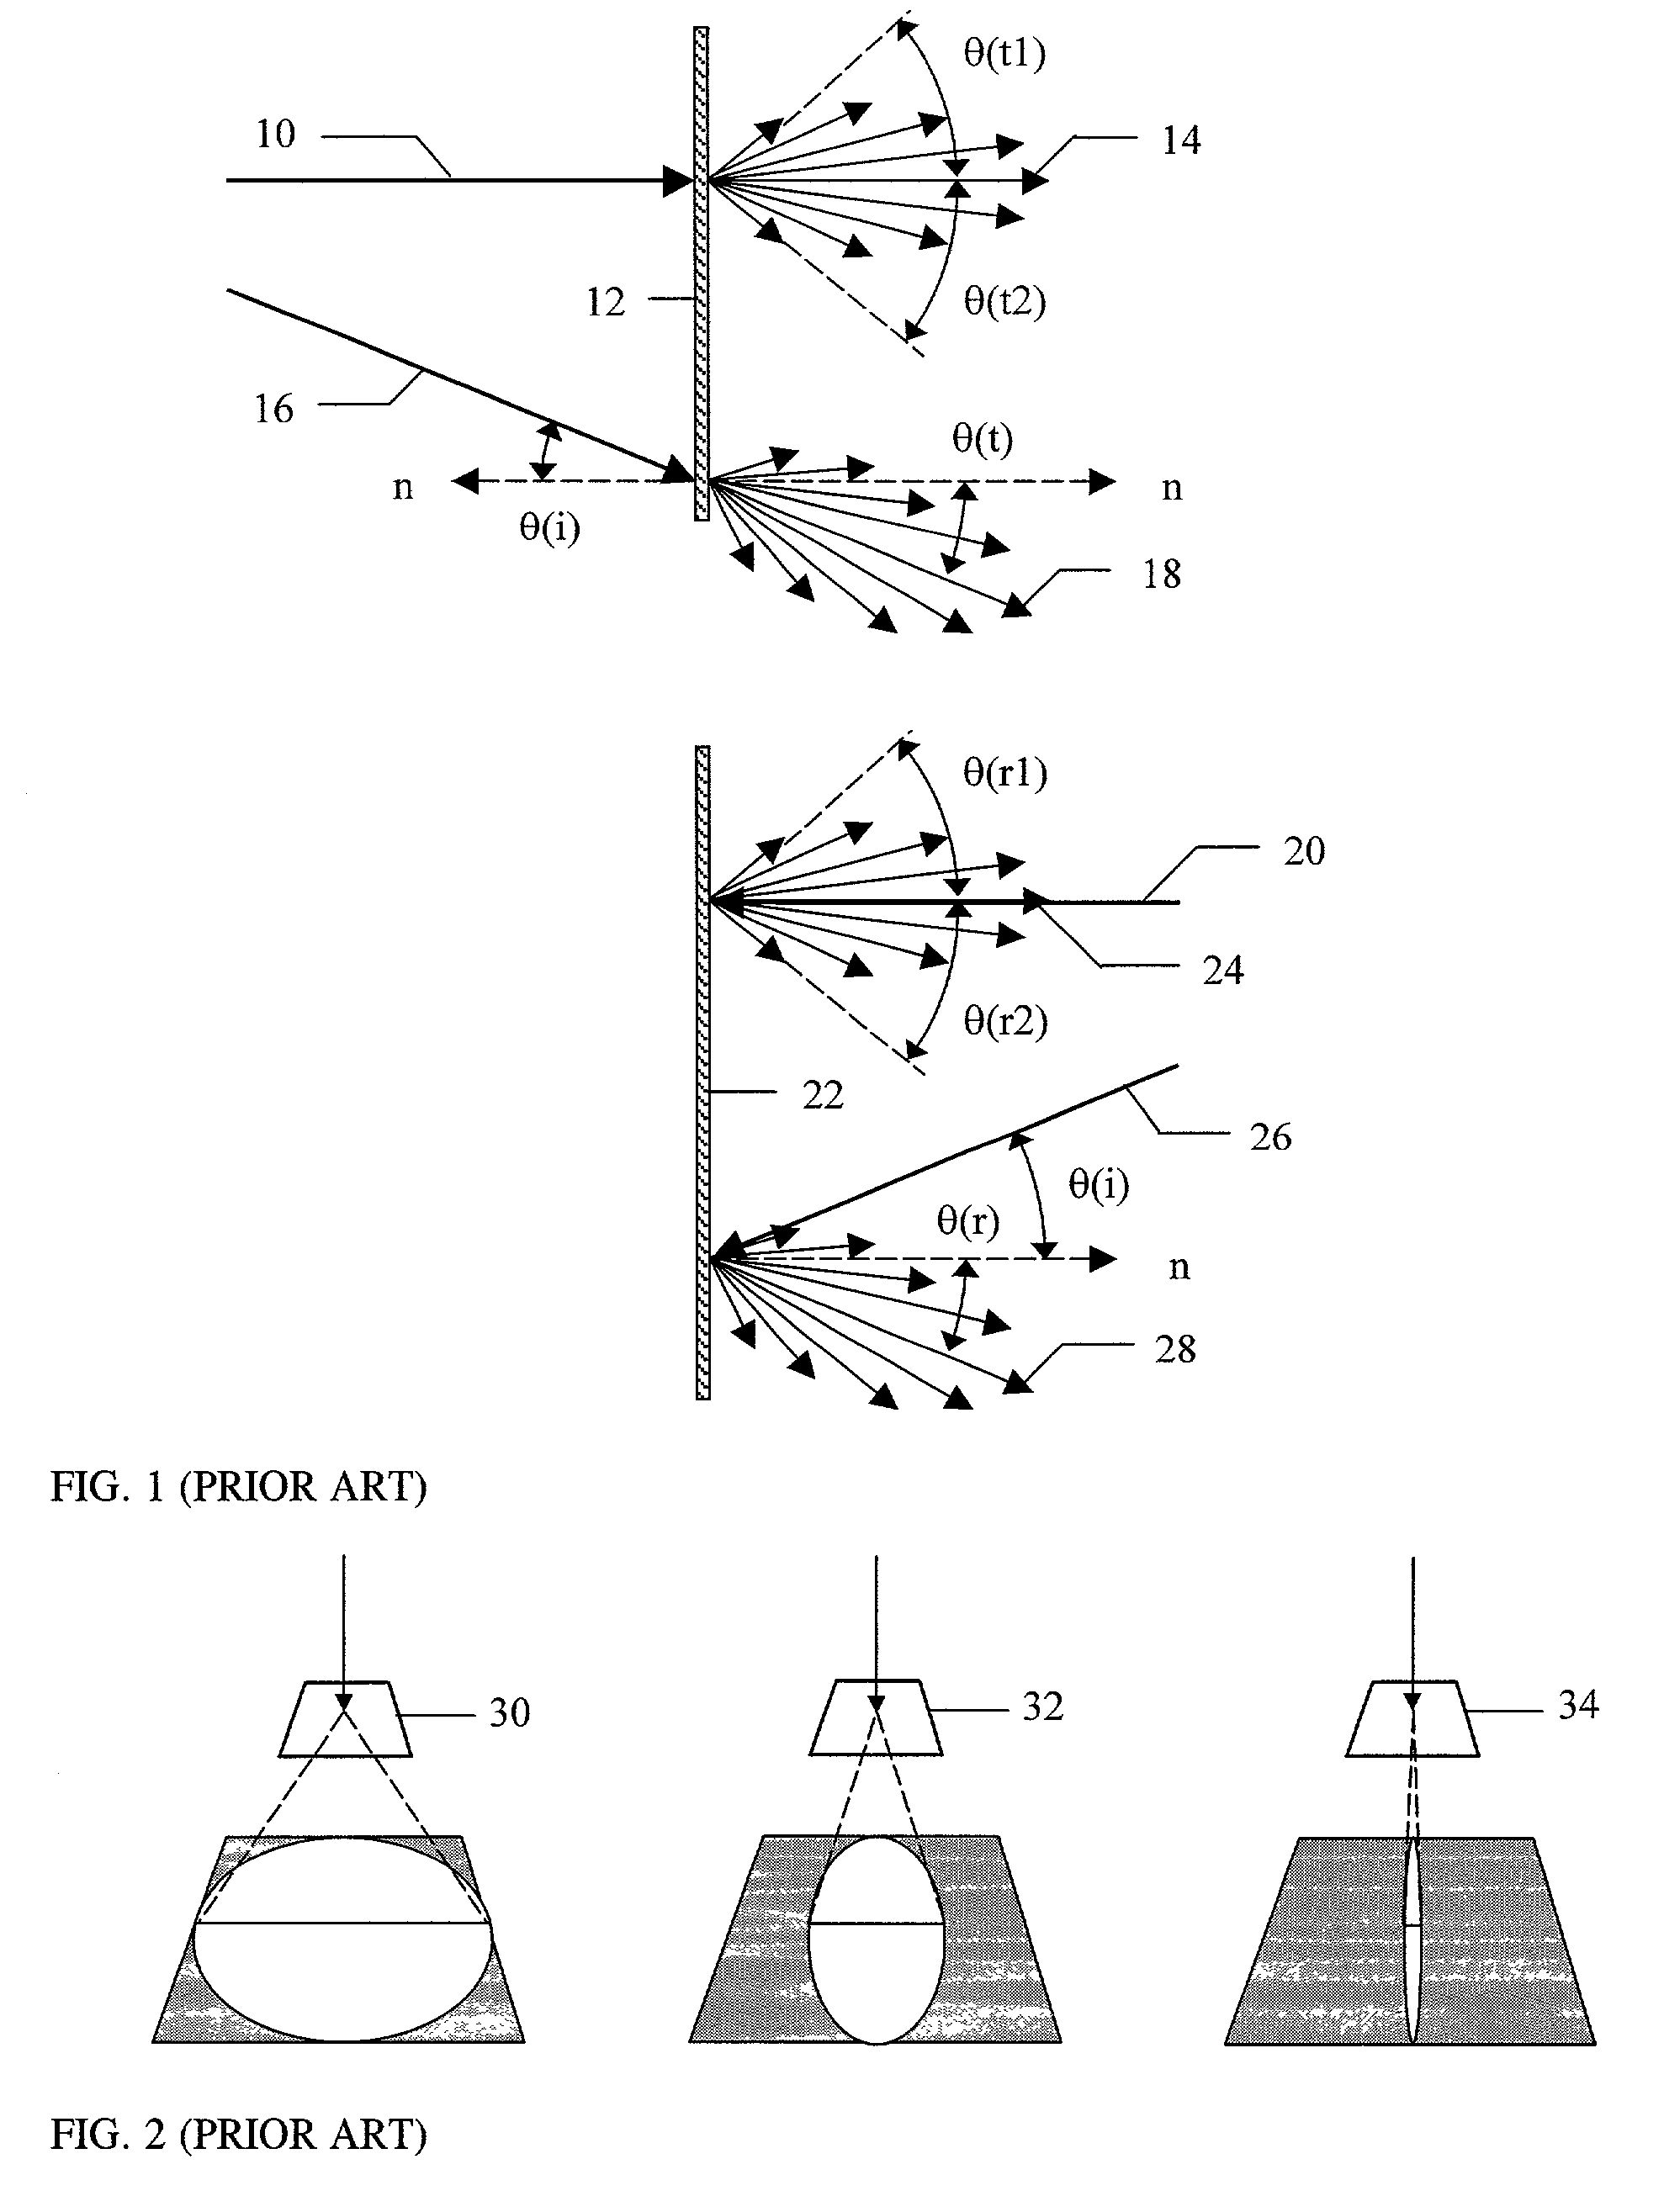 Light control devices and methods implemented with kinoform diffusers having controllable diffusion characteristics